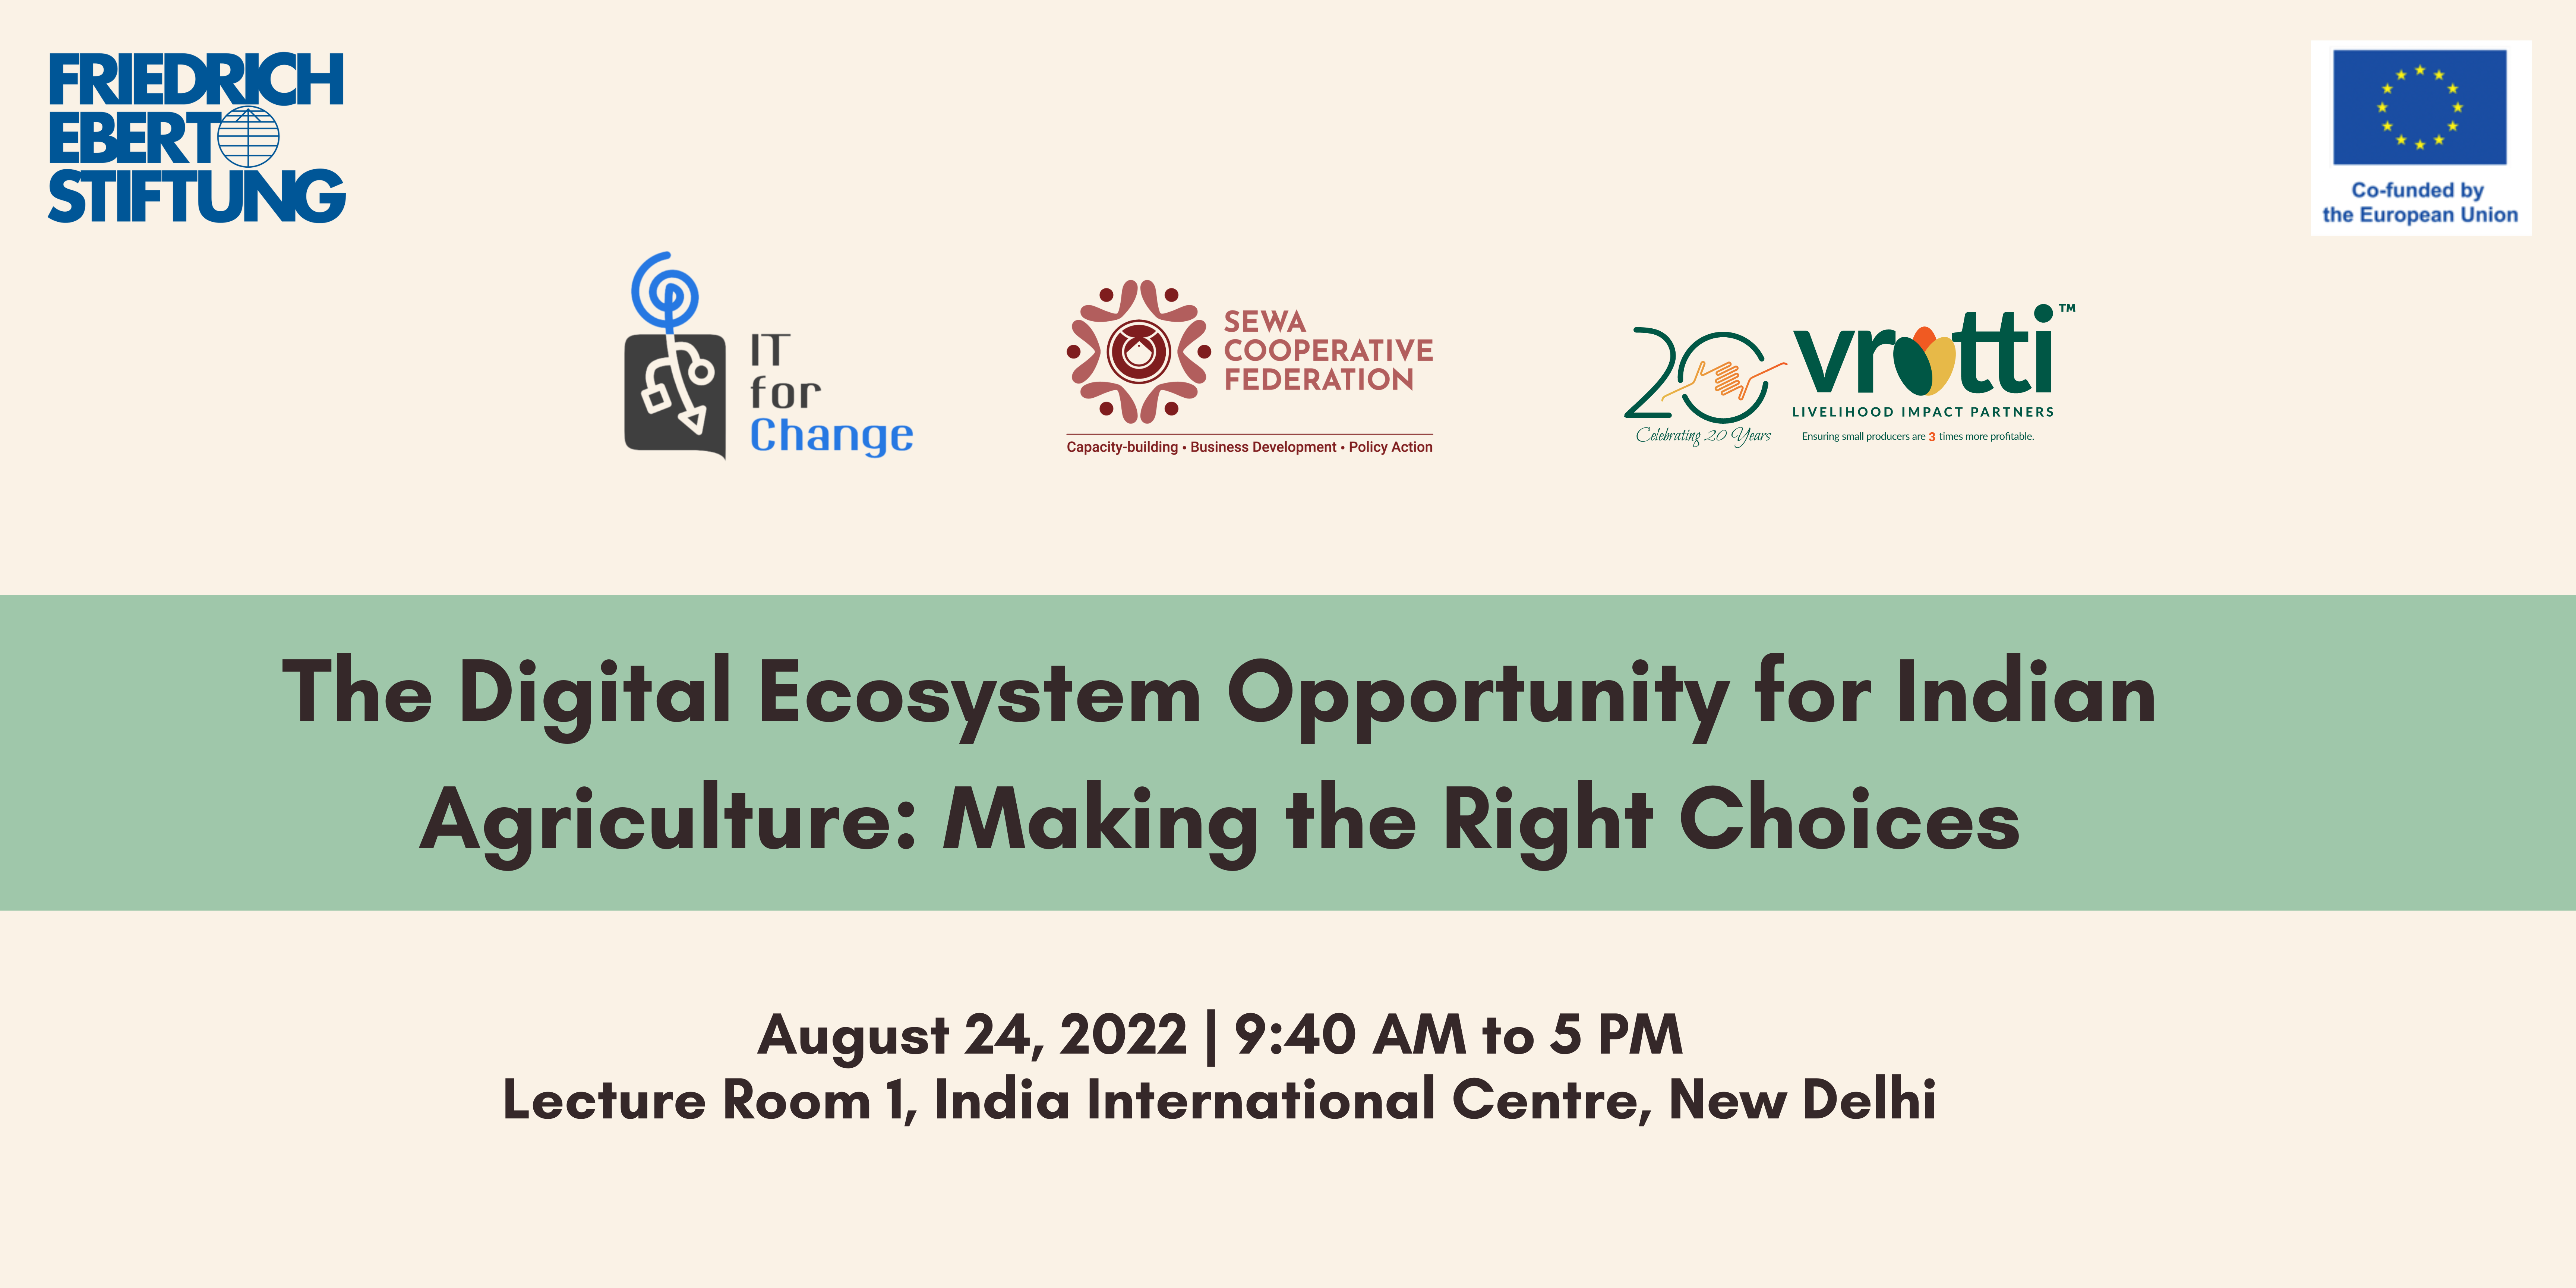 The Digital Ecosystem Opportunity for Indian Agriculture: Making the Right Choices